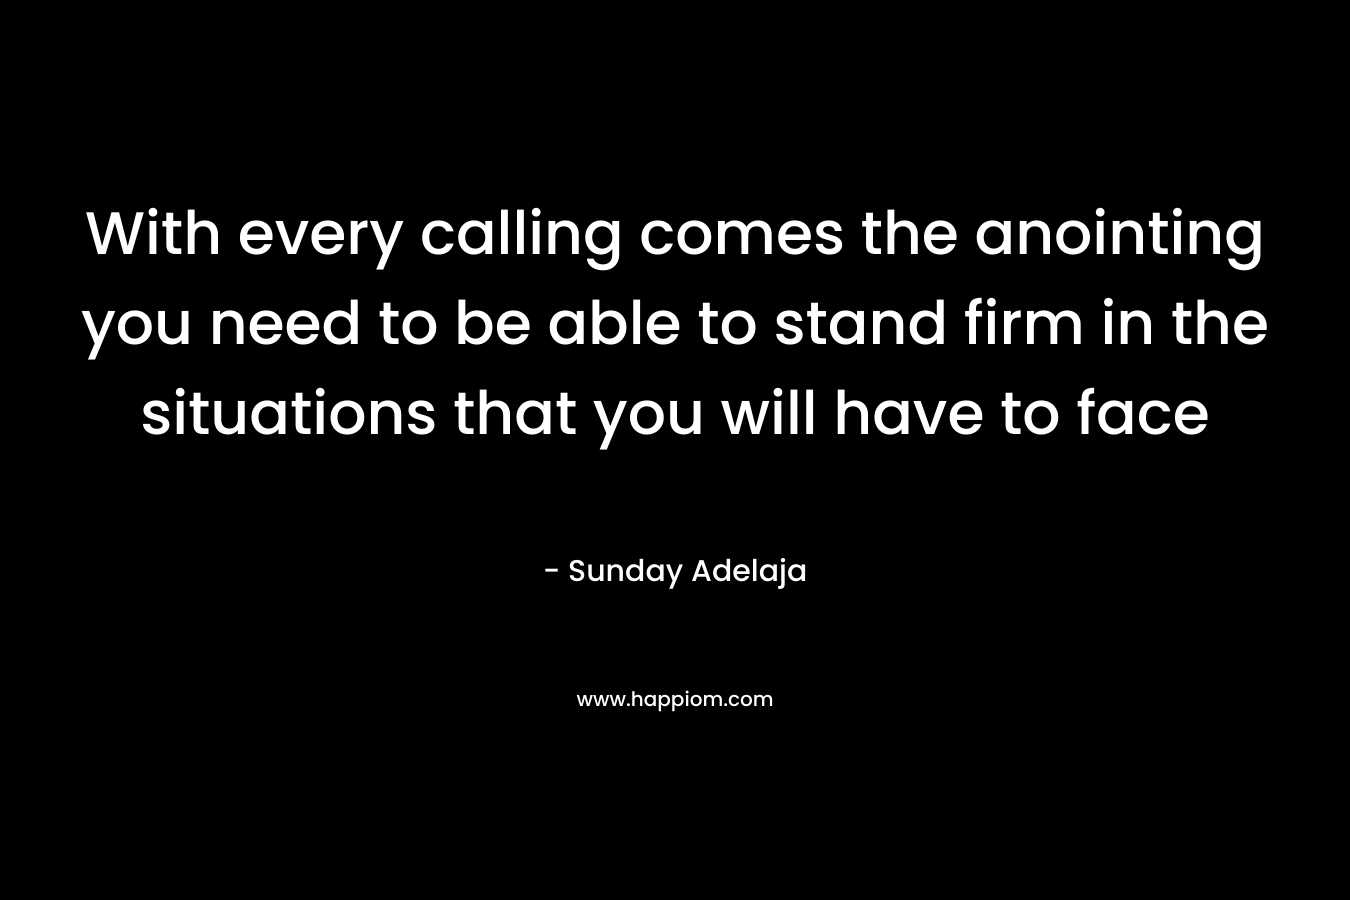 With every calling comes the anointing you need to be able to stand firm in the situations that you will have to face – Sunday Adelaja